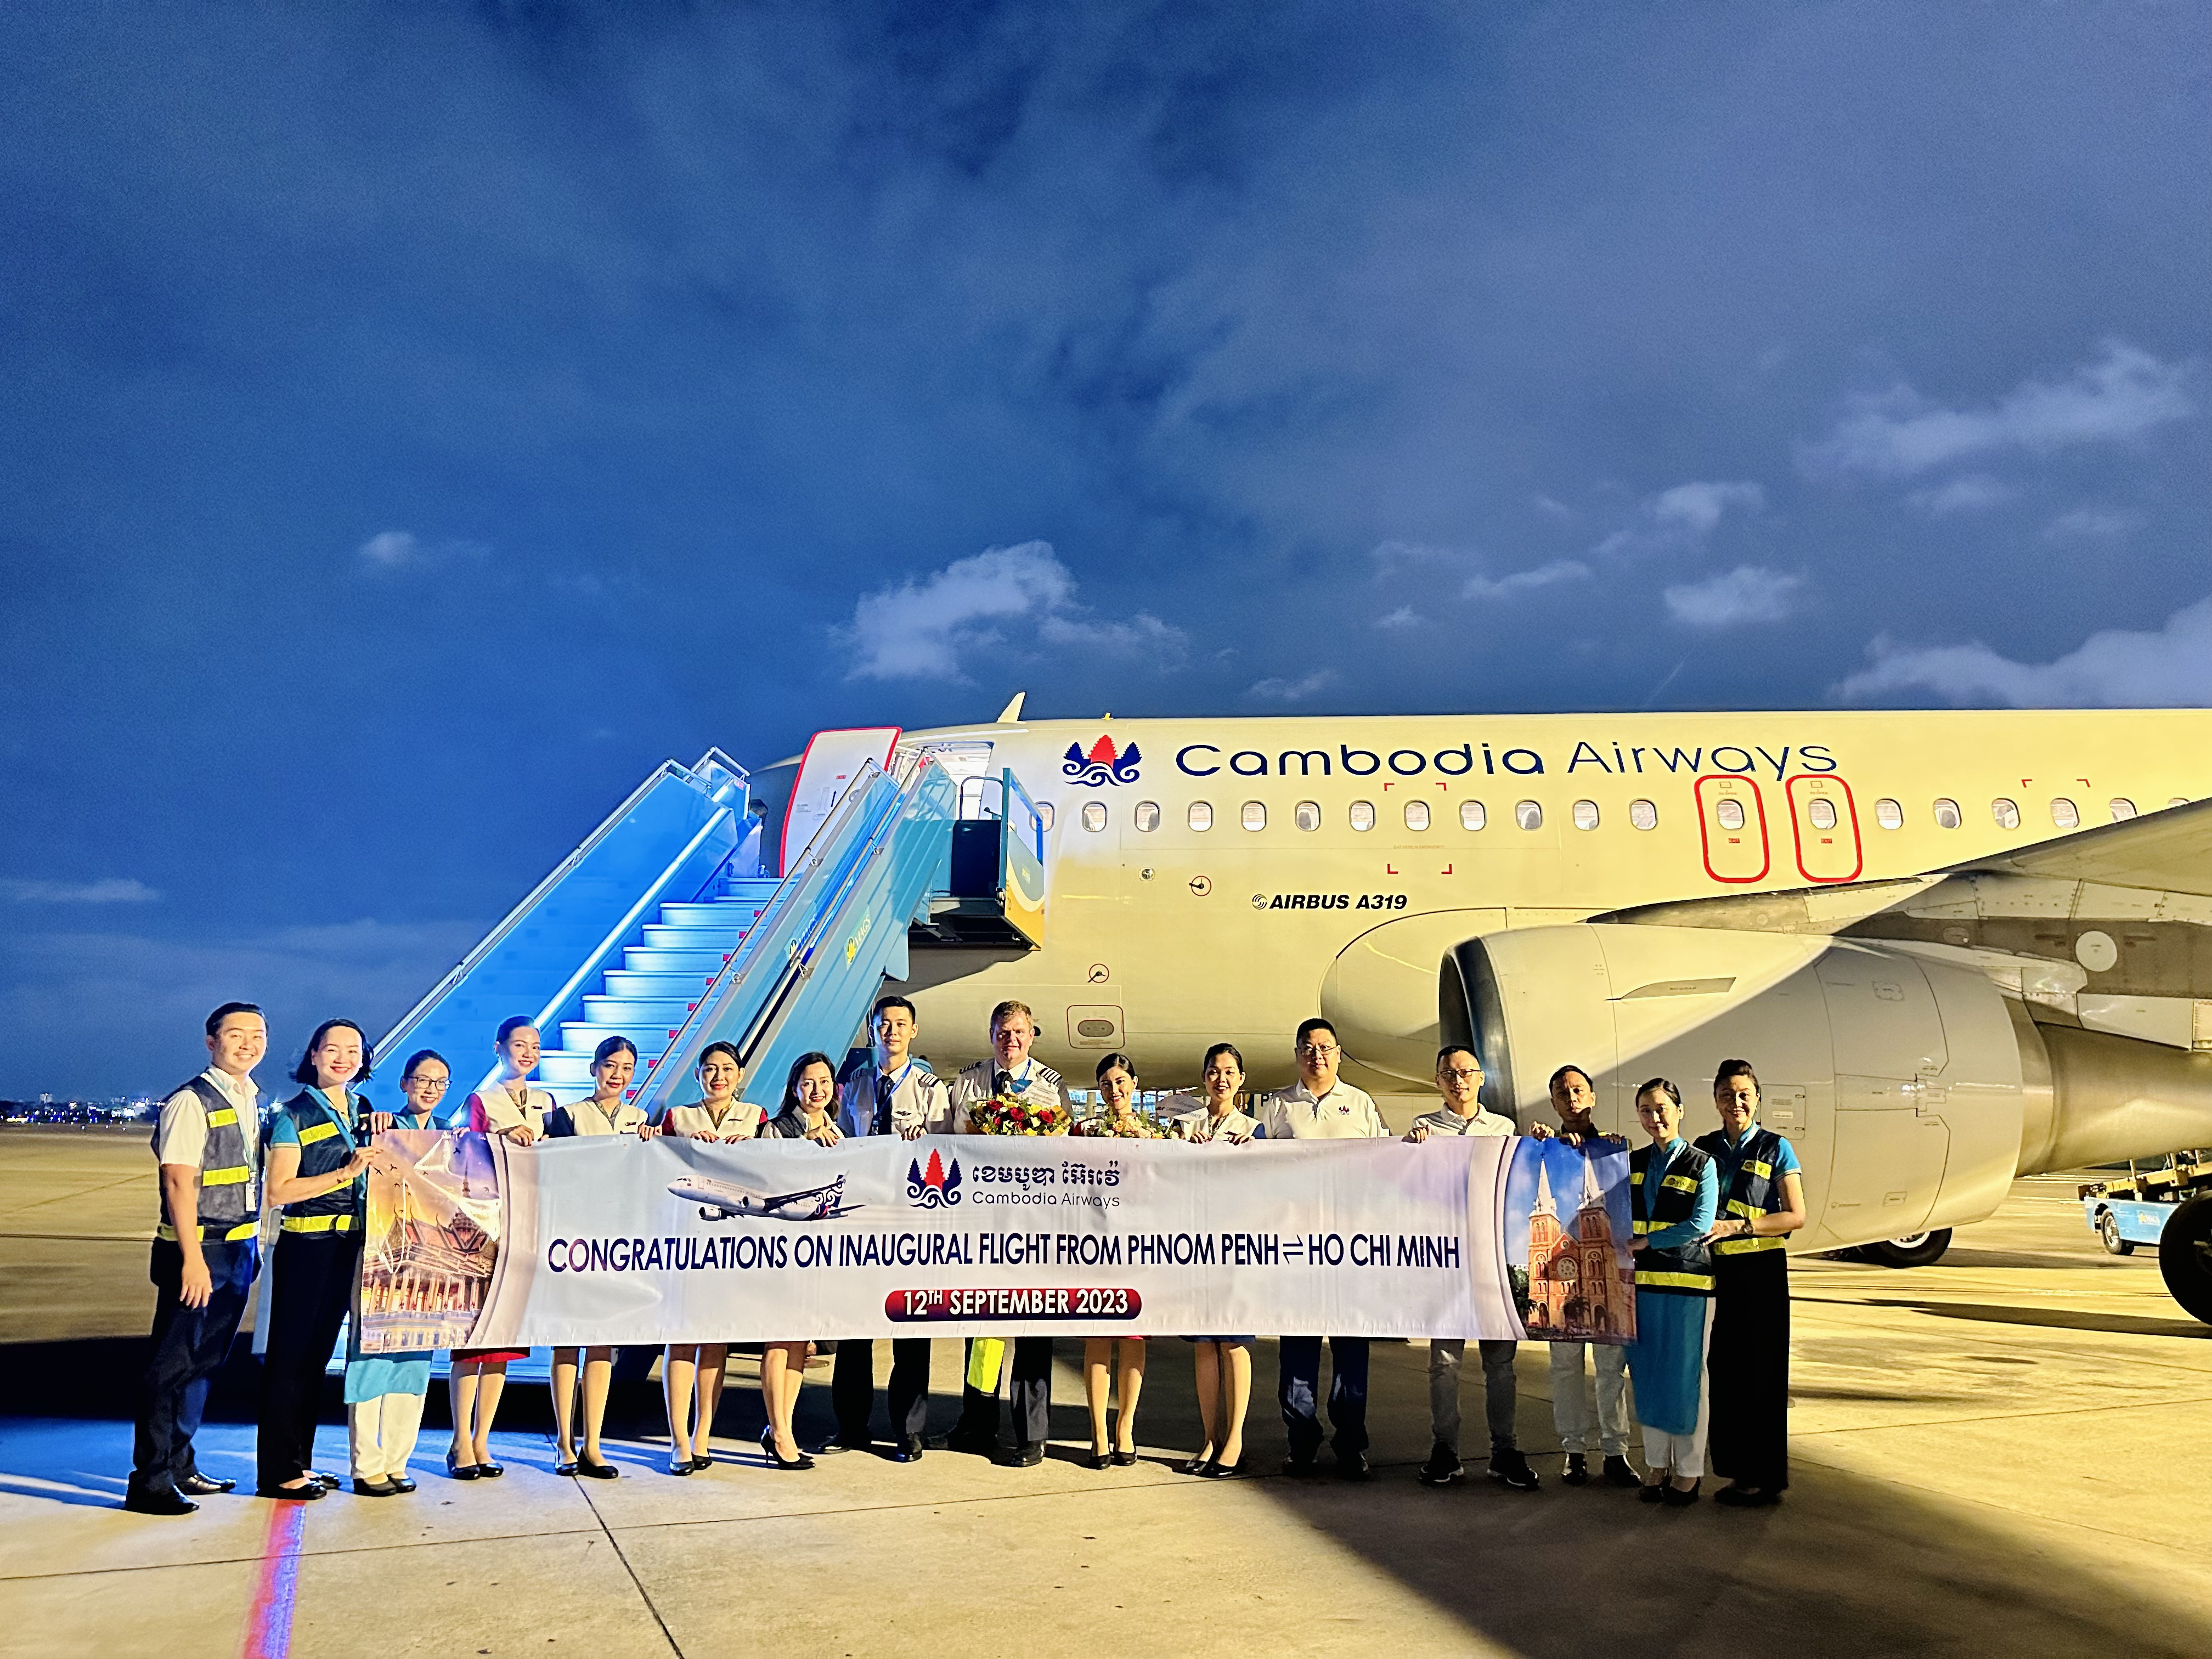 CAMBODIA AIRWAYS LAUNCHES REGULAR FLIGHTS TO HO CHI MINH CITY